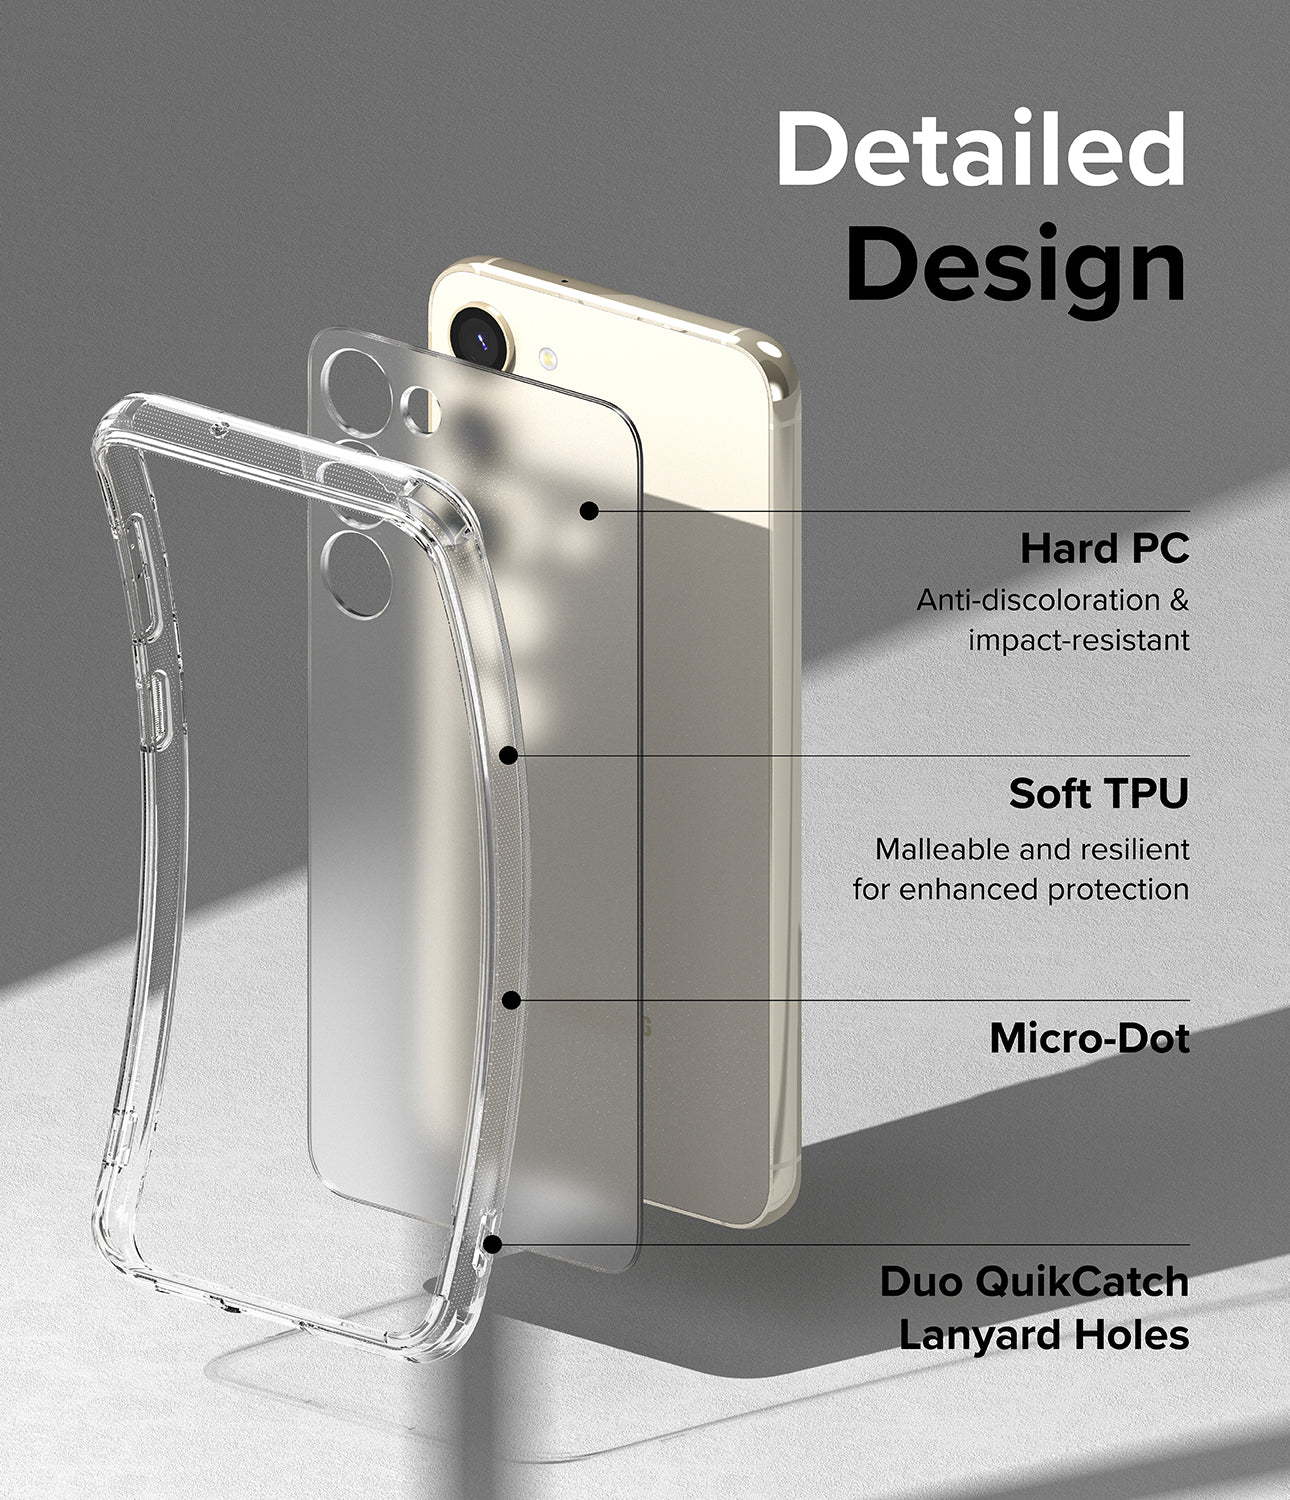 Galaxy S23 Plus Case | Fusion Matte Clear - Detailed Design. Anti-discoloration and impact-resistant with Hard PC. Malleable and resilient for enhanced protection with Soft TPU. Micro-Dot. Duo QuikCatch Lanyard Holes.